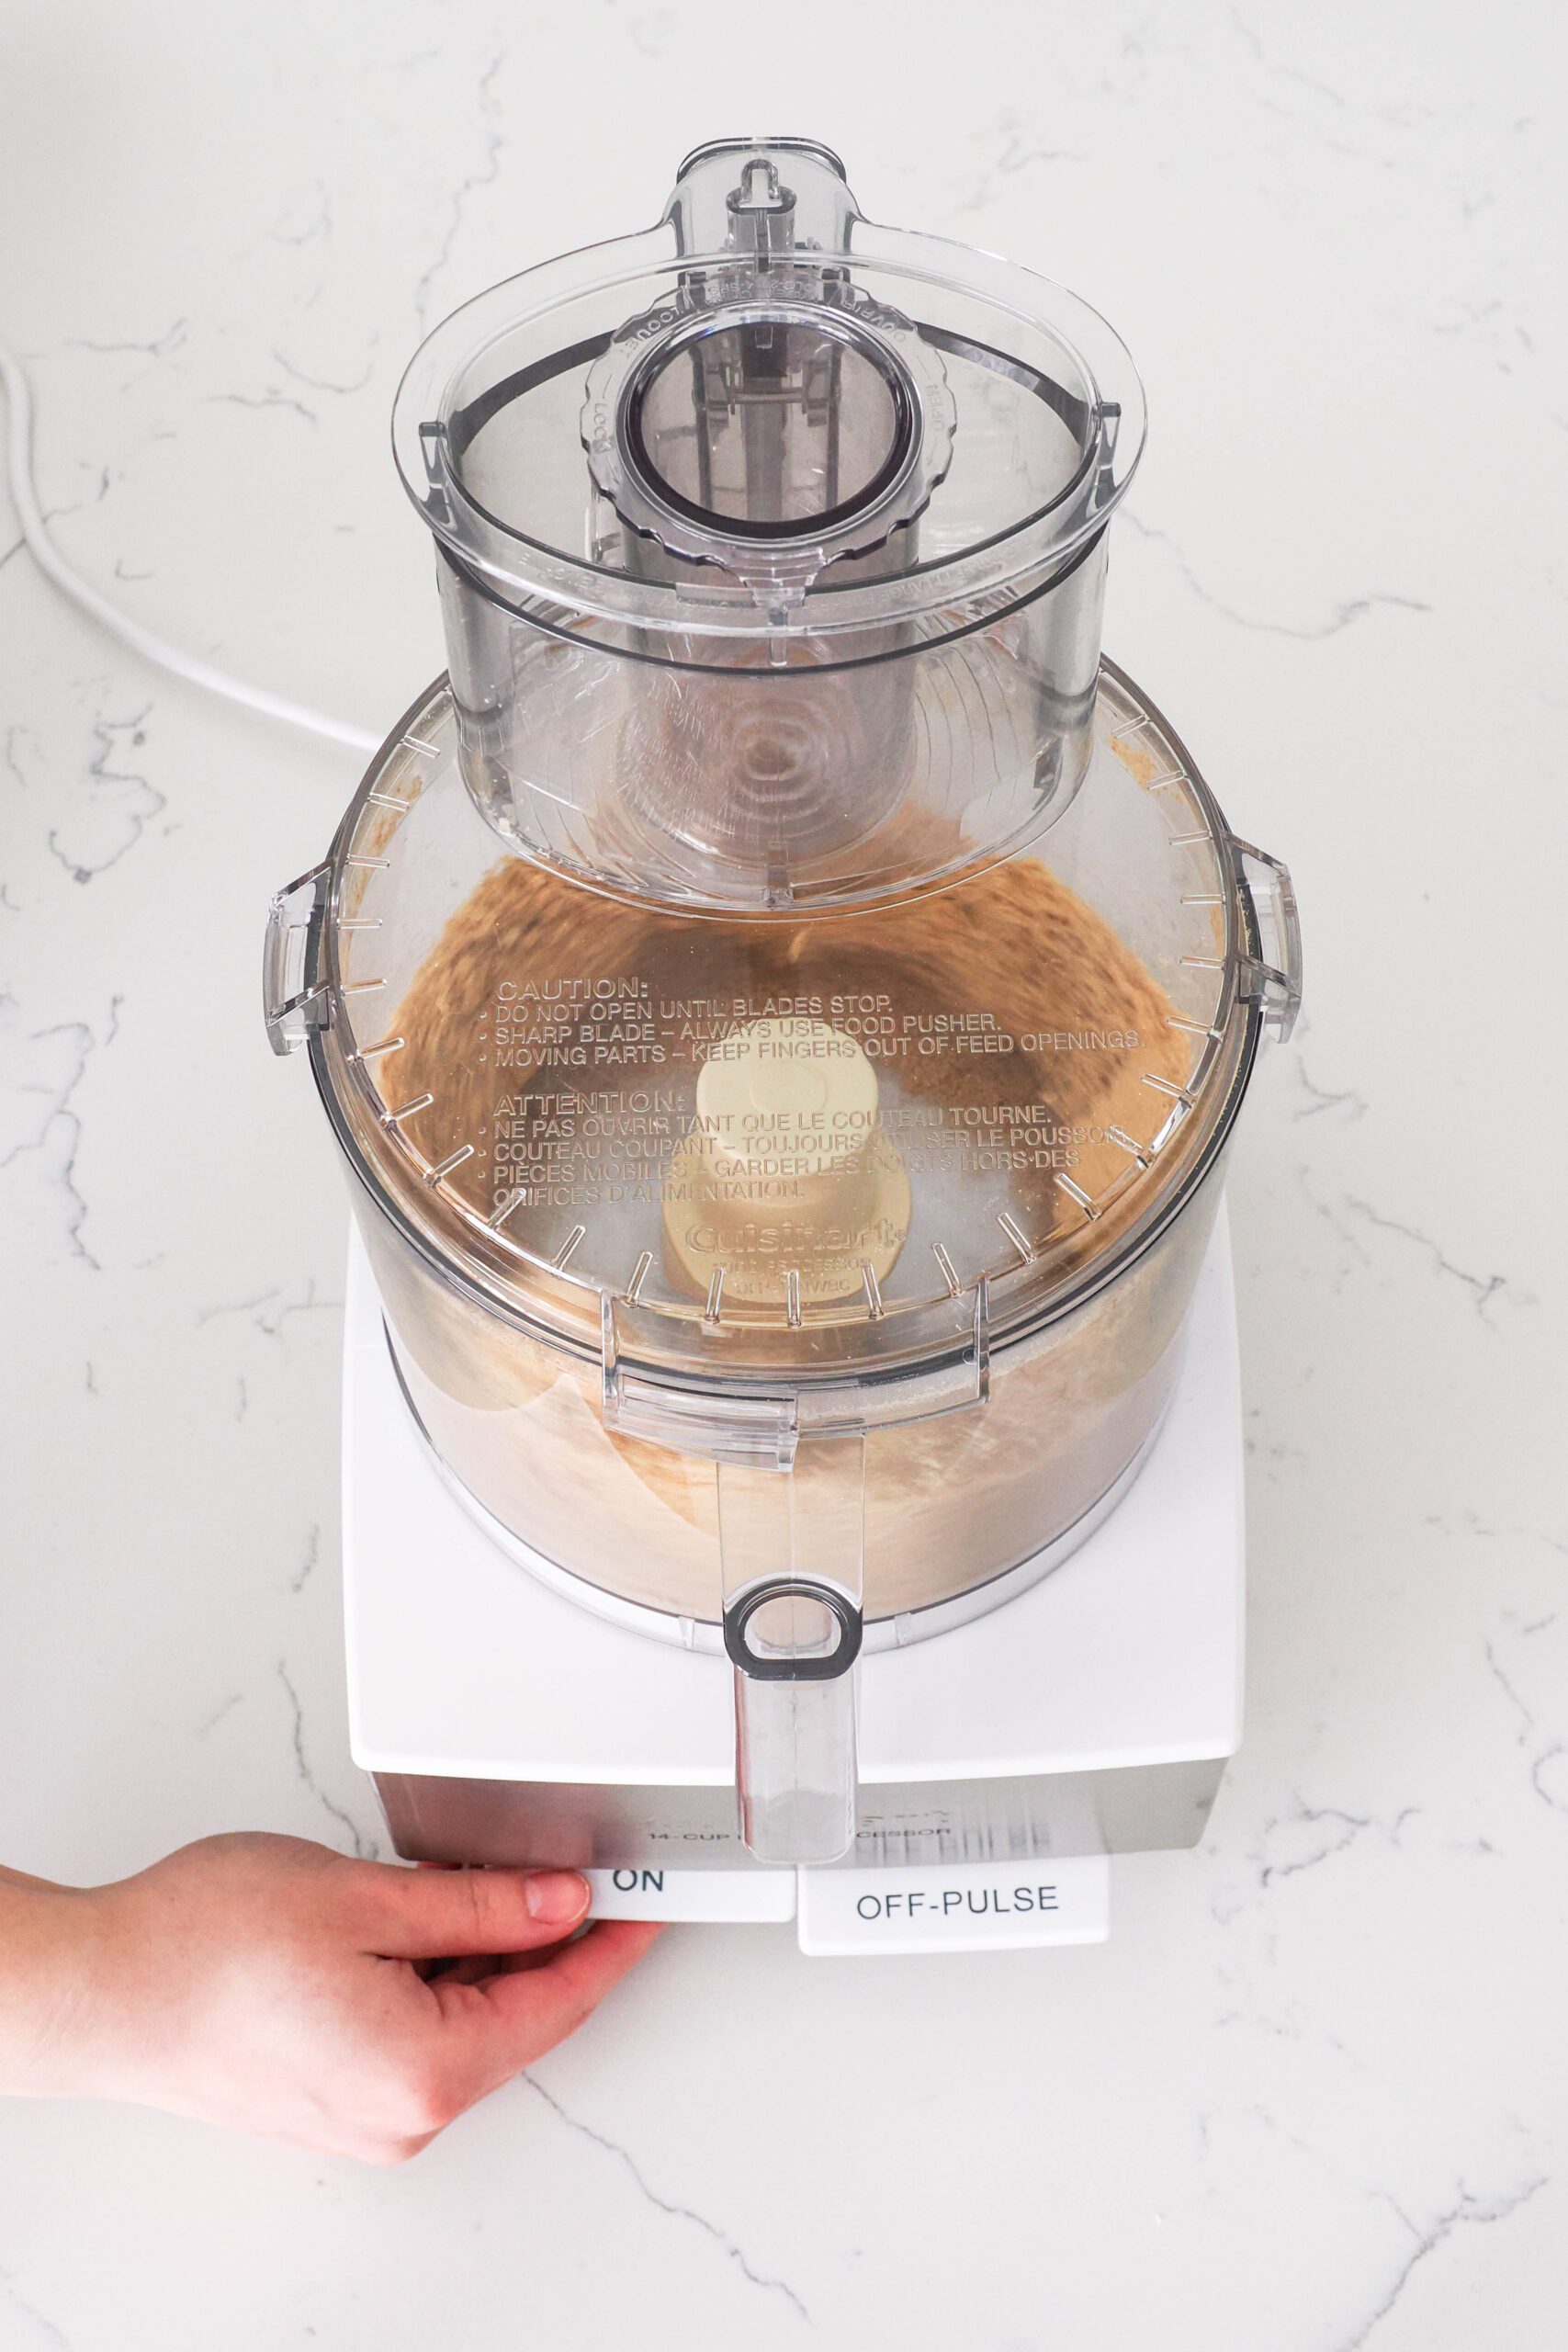 A hand presses the "on" button on a food processor with pecans and graham crackers.